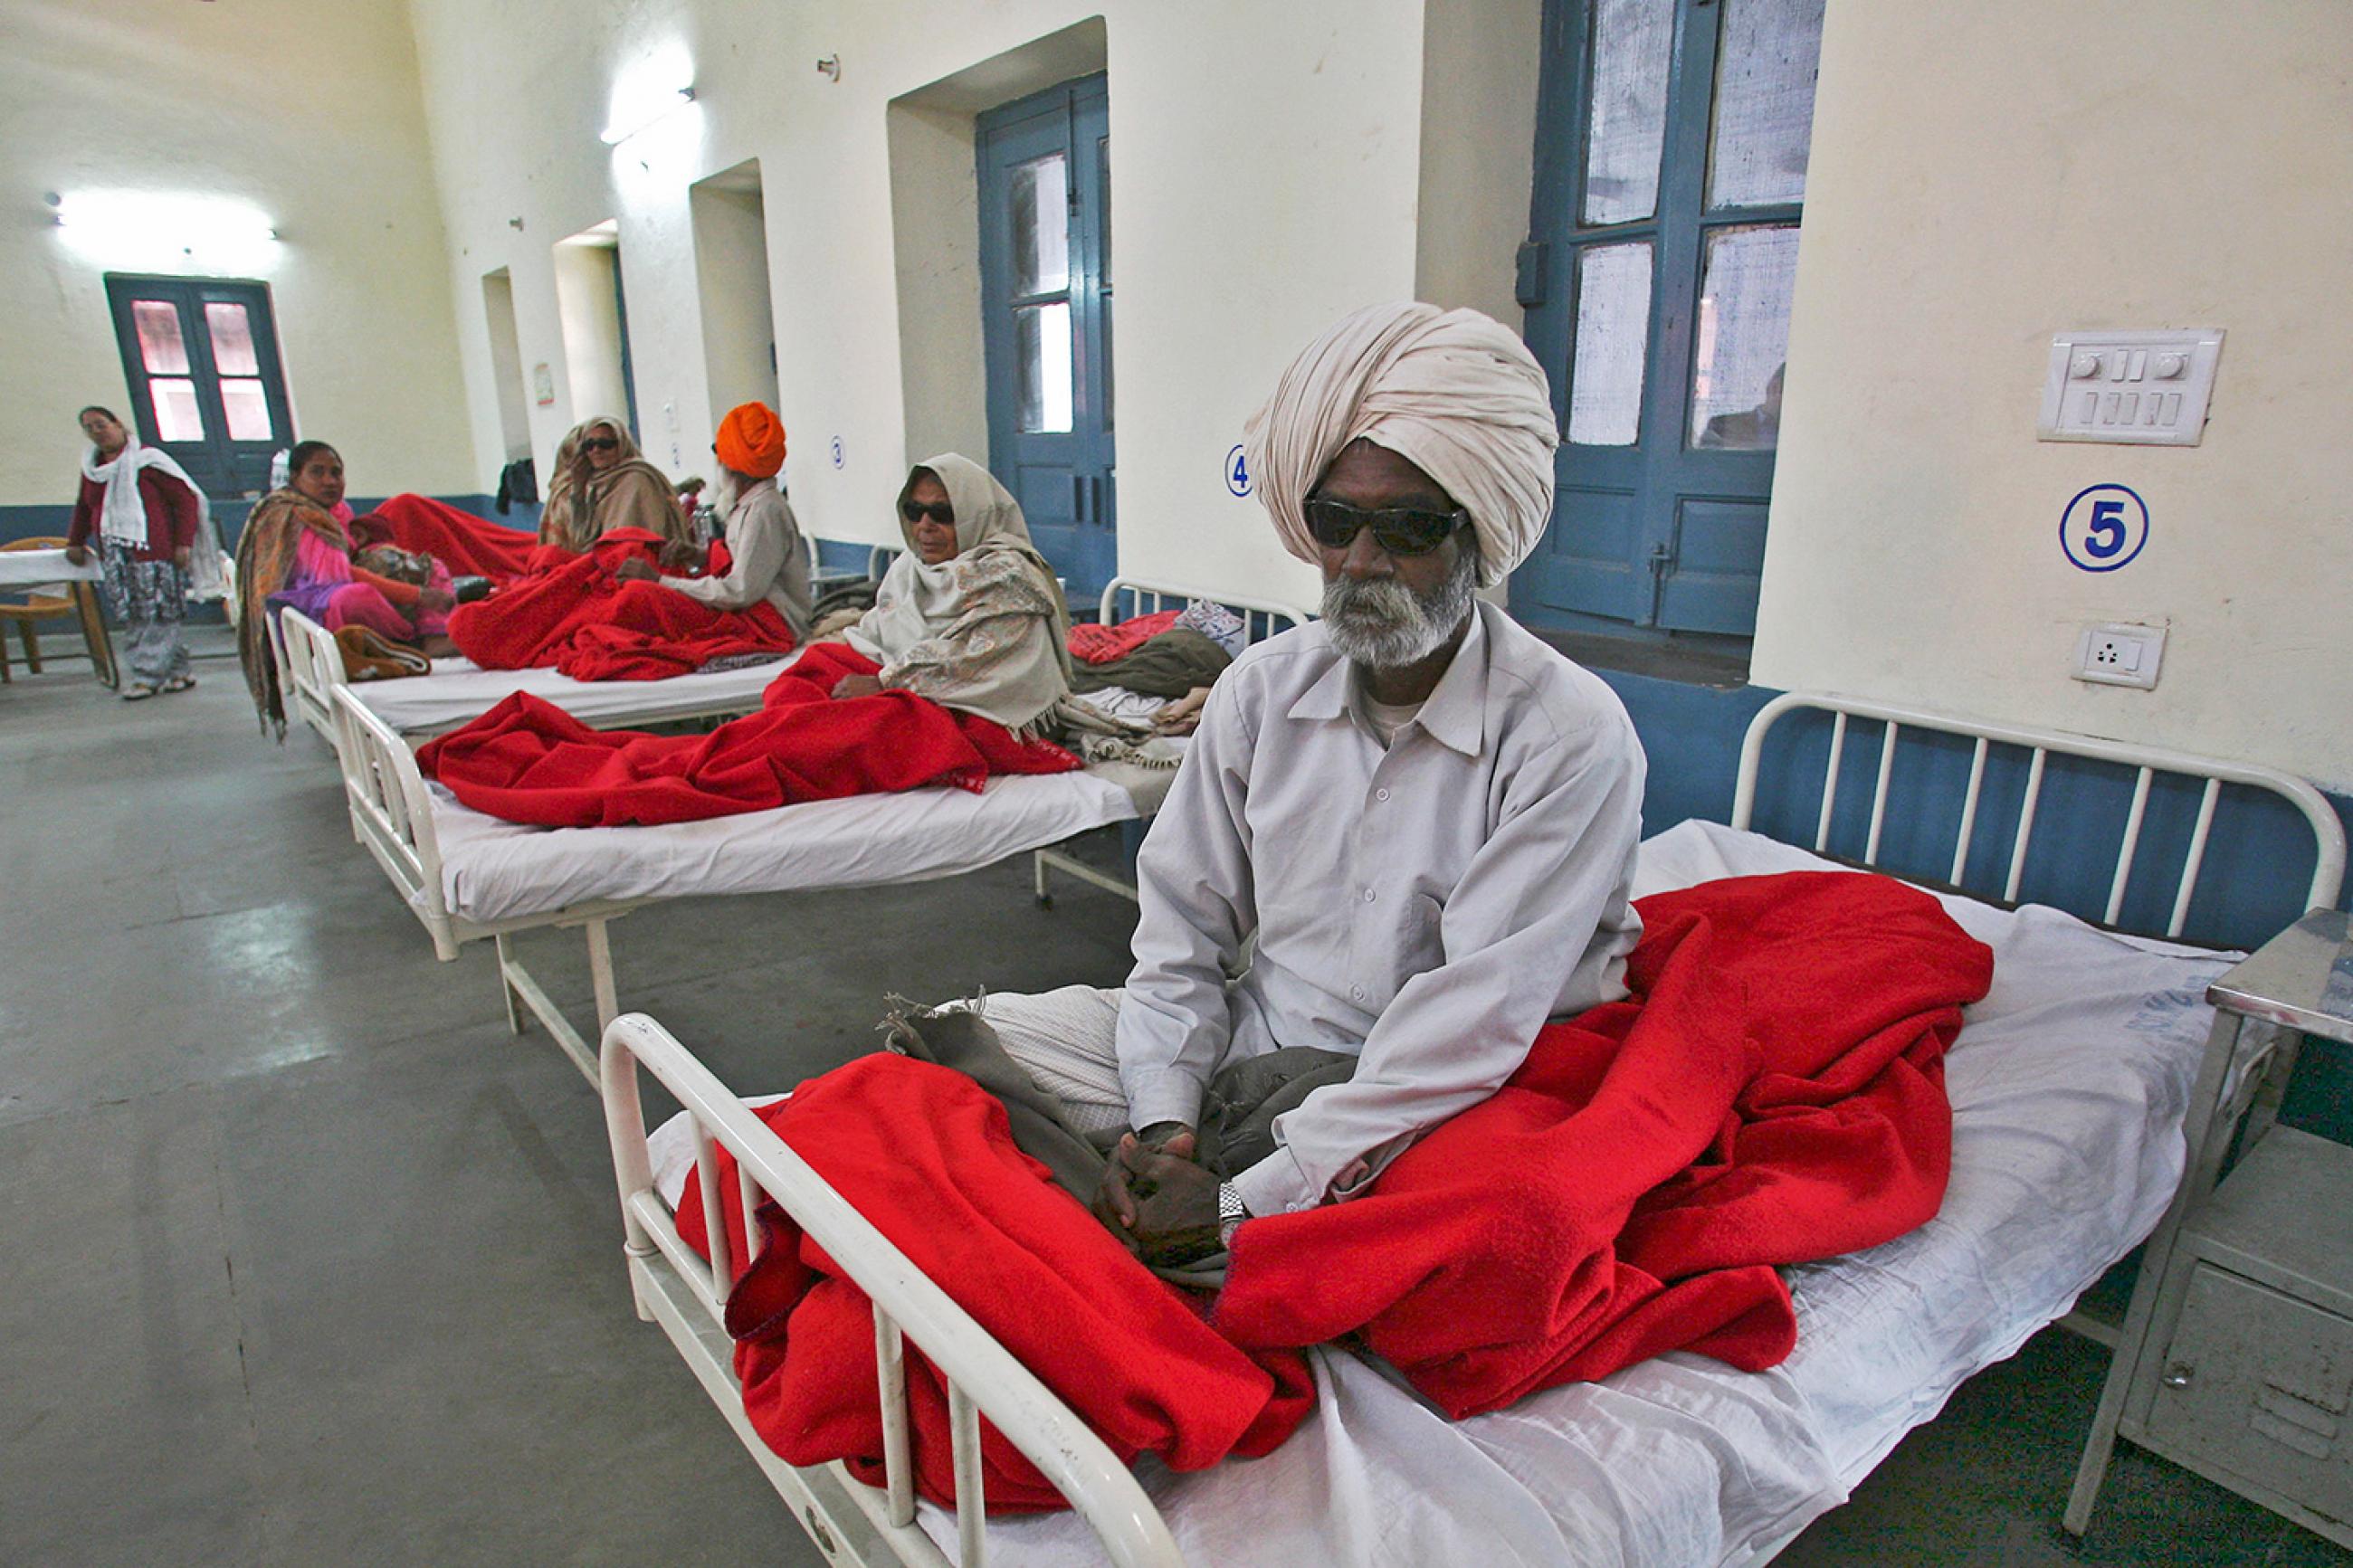 People waiting for treatment at a hospital after undergoing cataract removals from a free but shoddy eye surgery camp that caused them to lose their vision—in Amritsar, India, on December 5, 2014. The photo shows several people sitting on hospital beds. One man in the foreground is wearing dark glasses. REUTERS/Munish Sharma